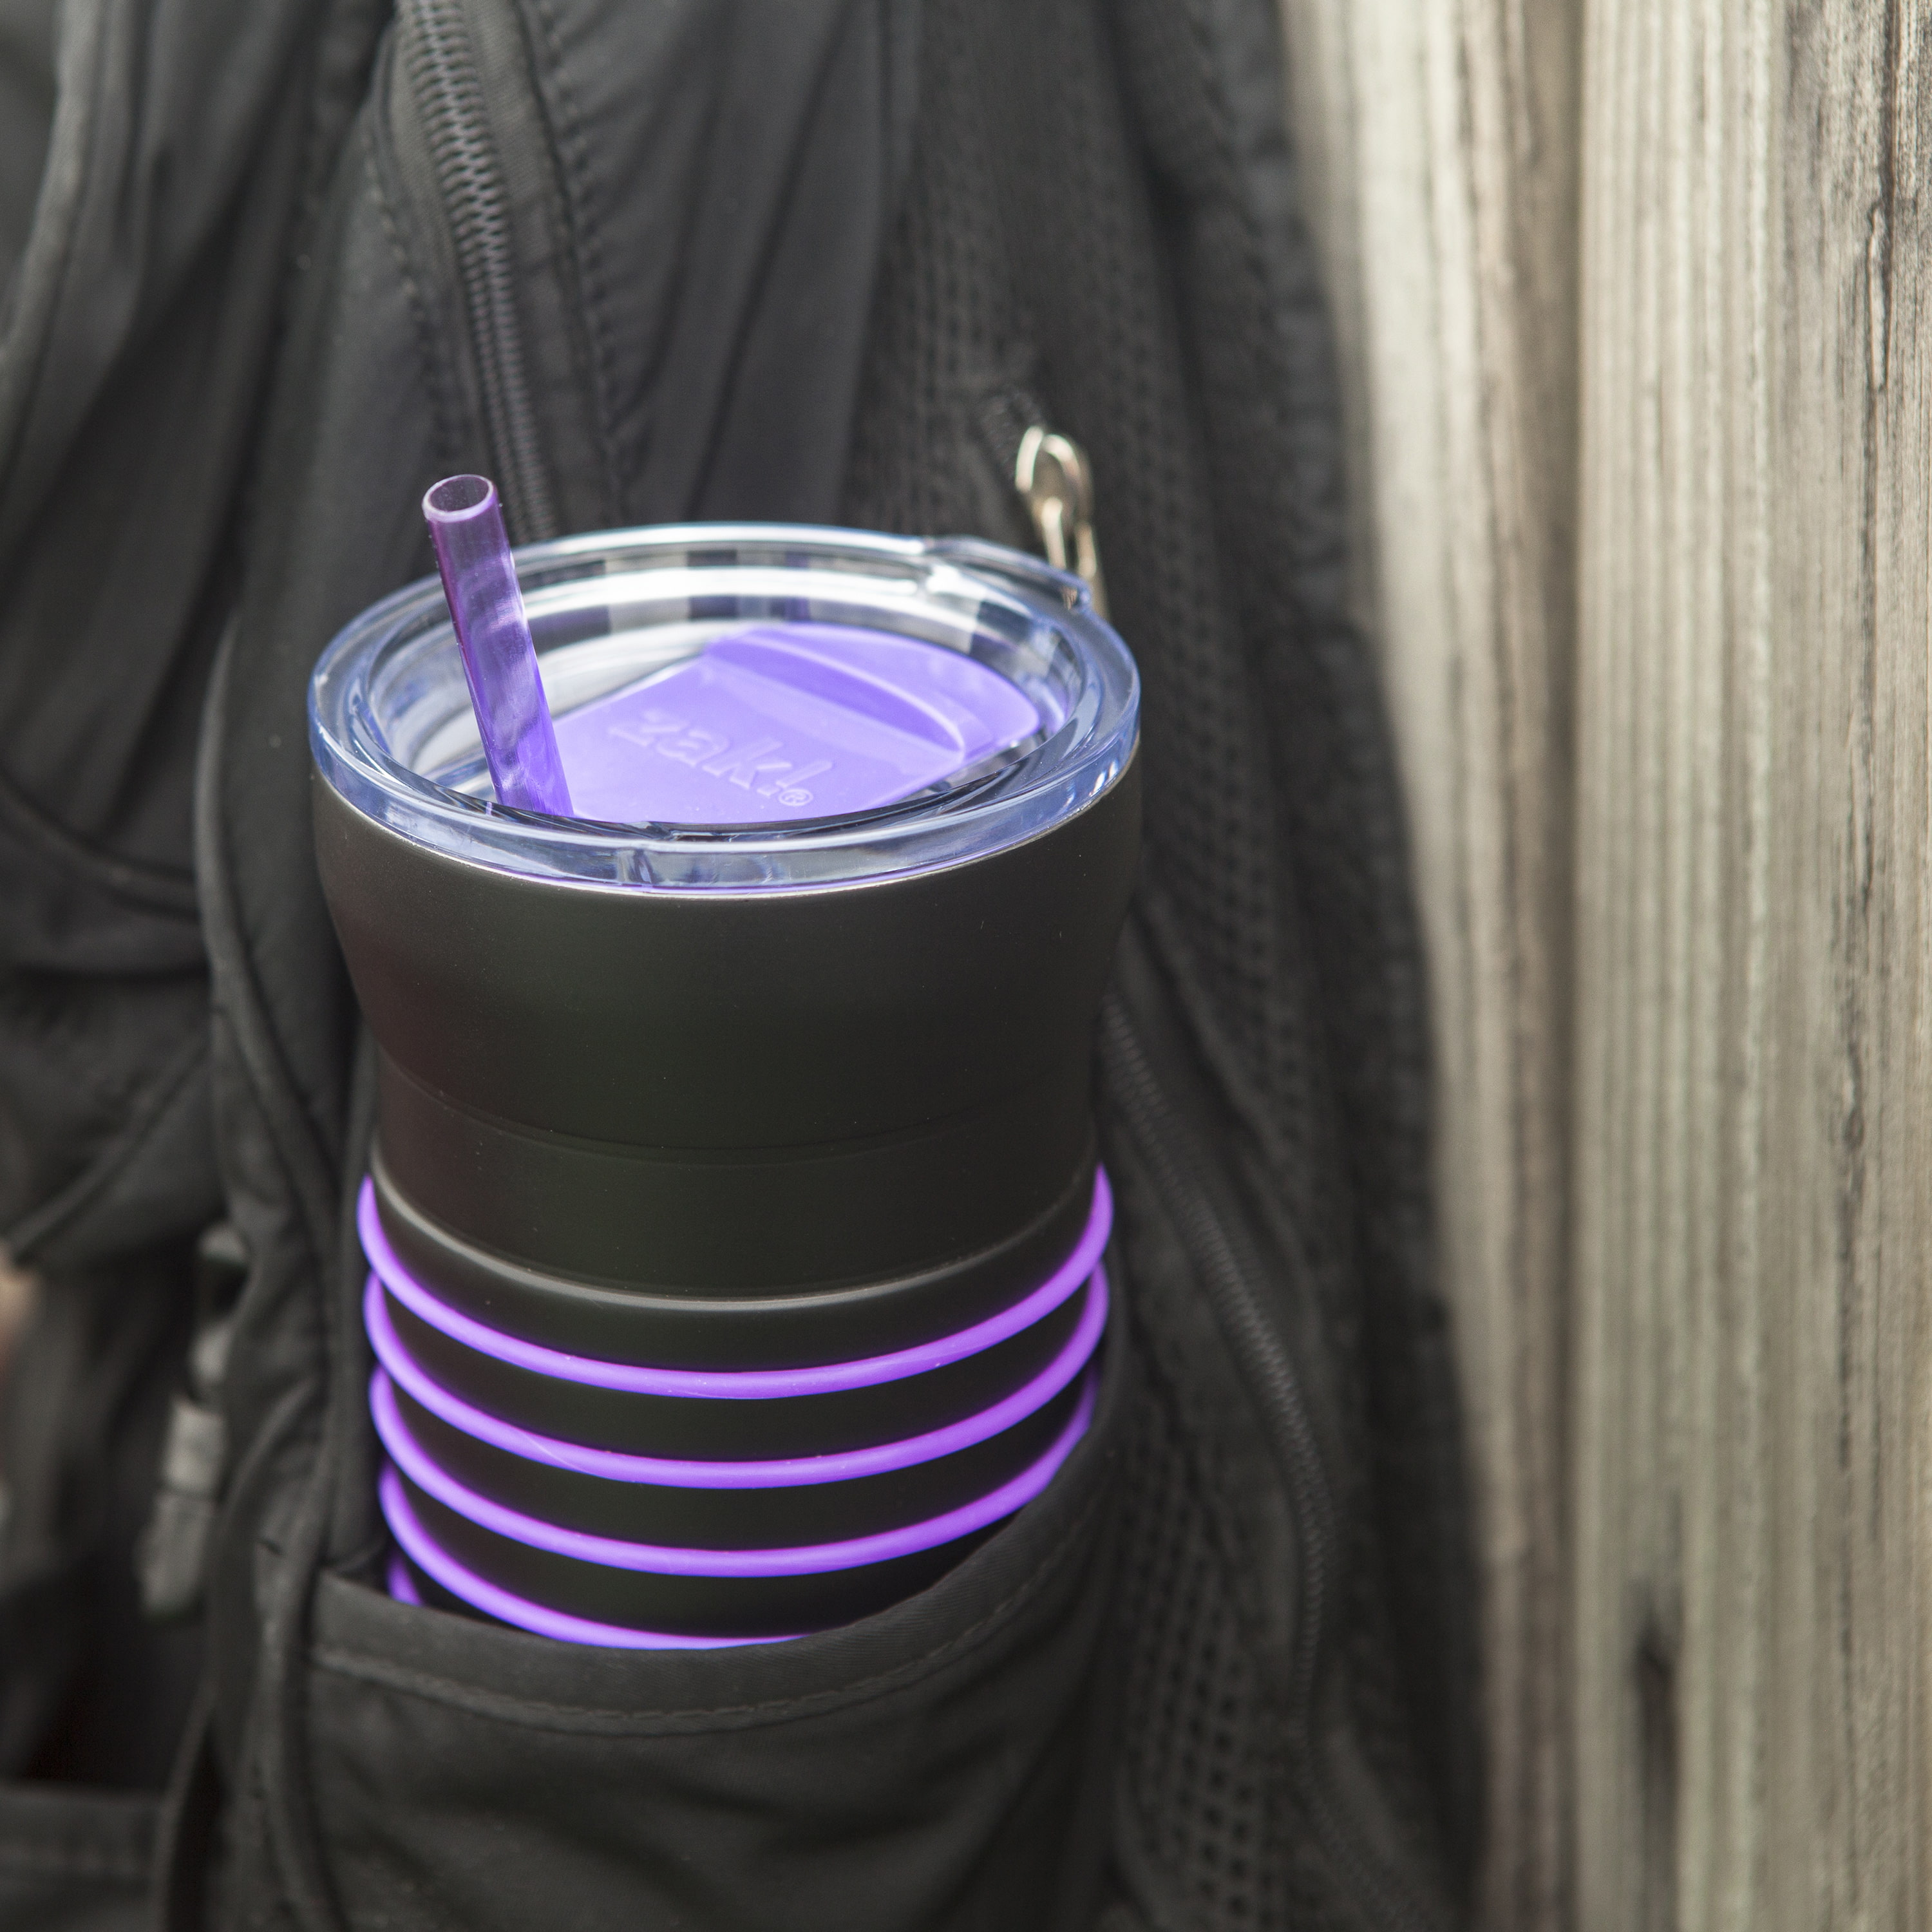 HydraTrak 20 ounce Vacuum Insulated Stainless Steel Tumbler, Black with Purple Rings slideshow image 4